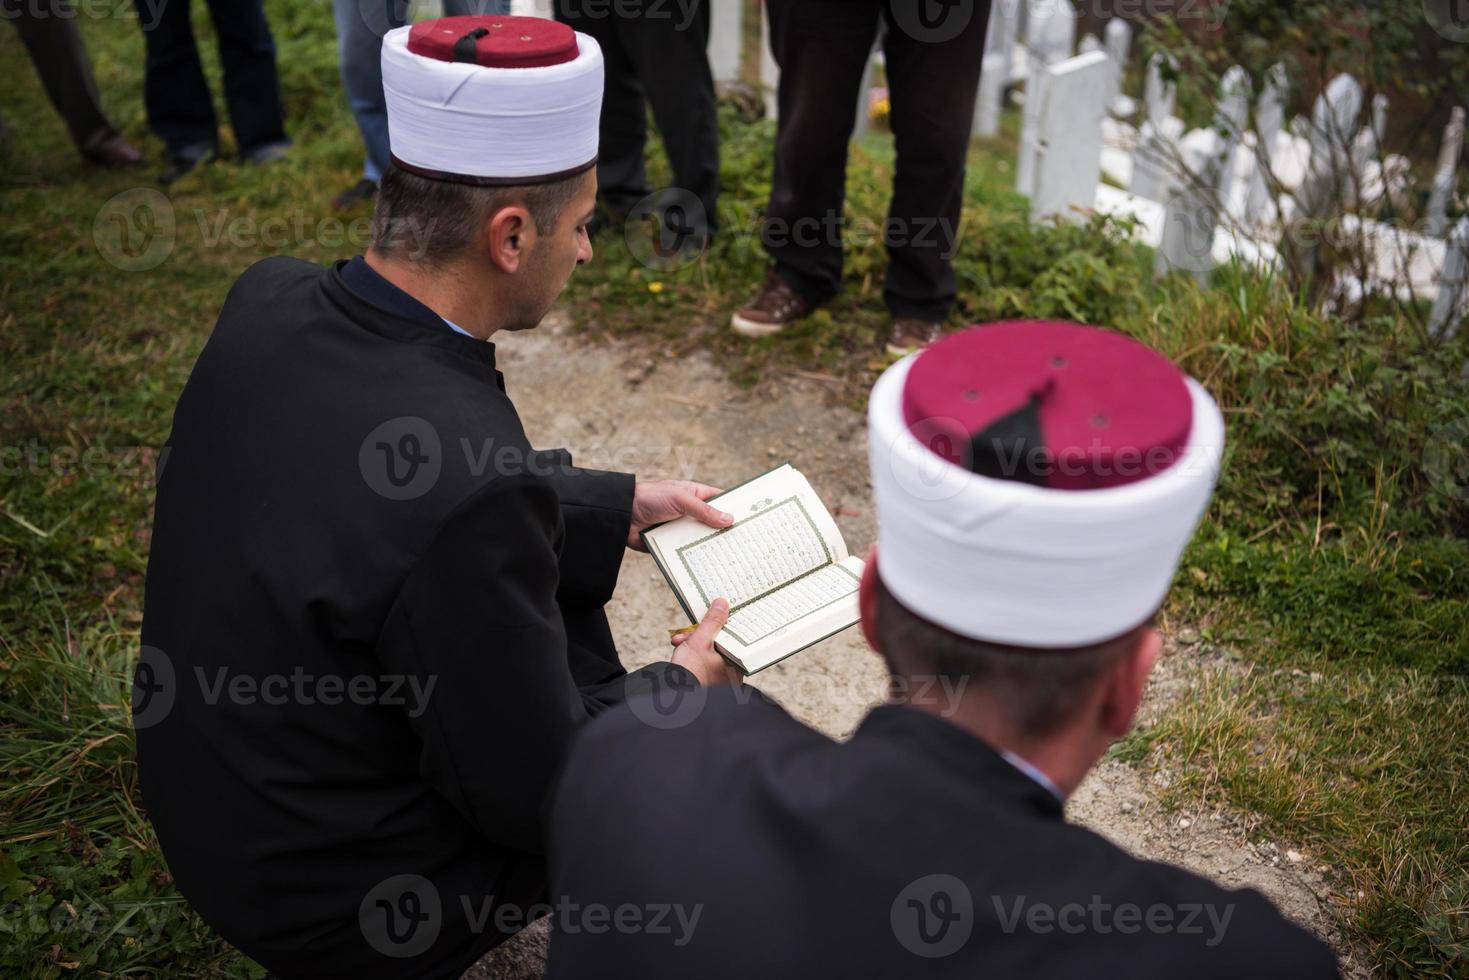 quran holy book reading by imam  on islamic funeral photo